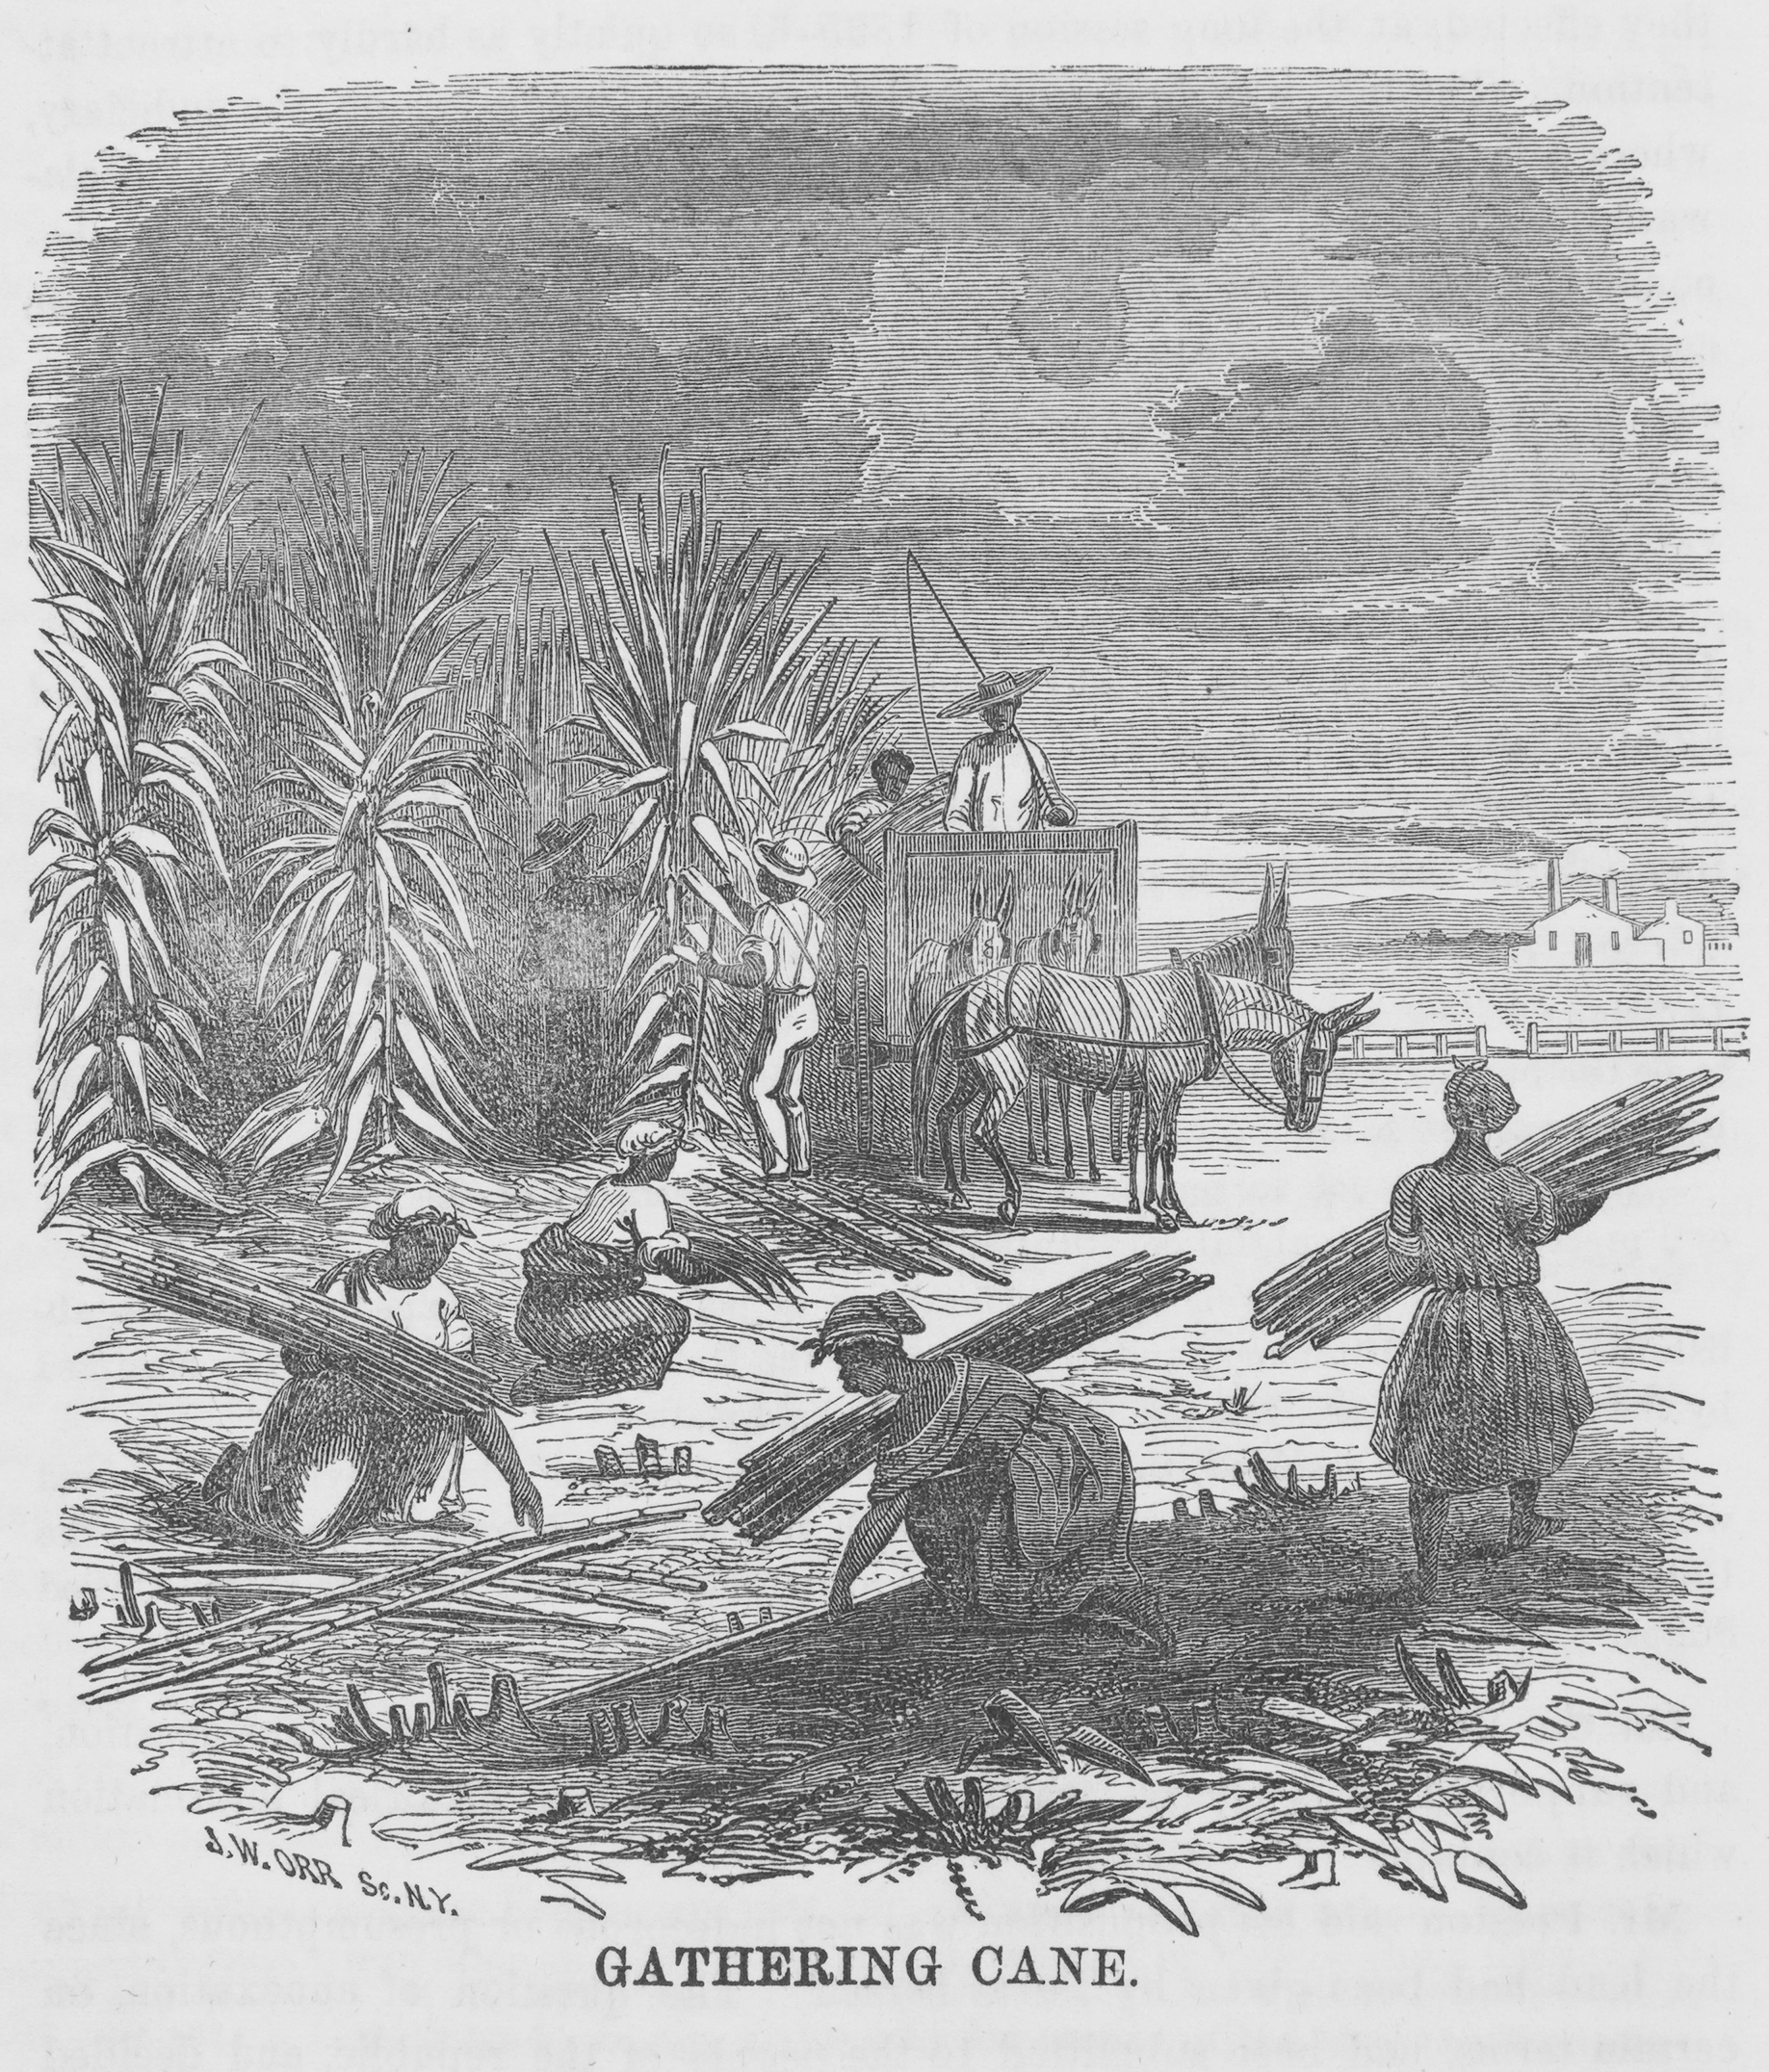 A print of enslaved Africans, many women, gathering stalks of sugar cane.